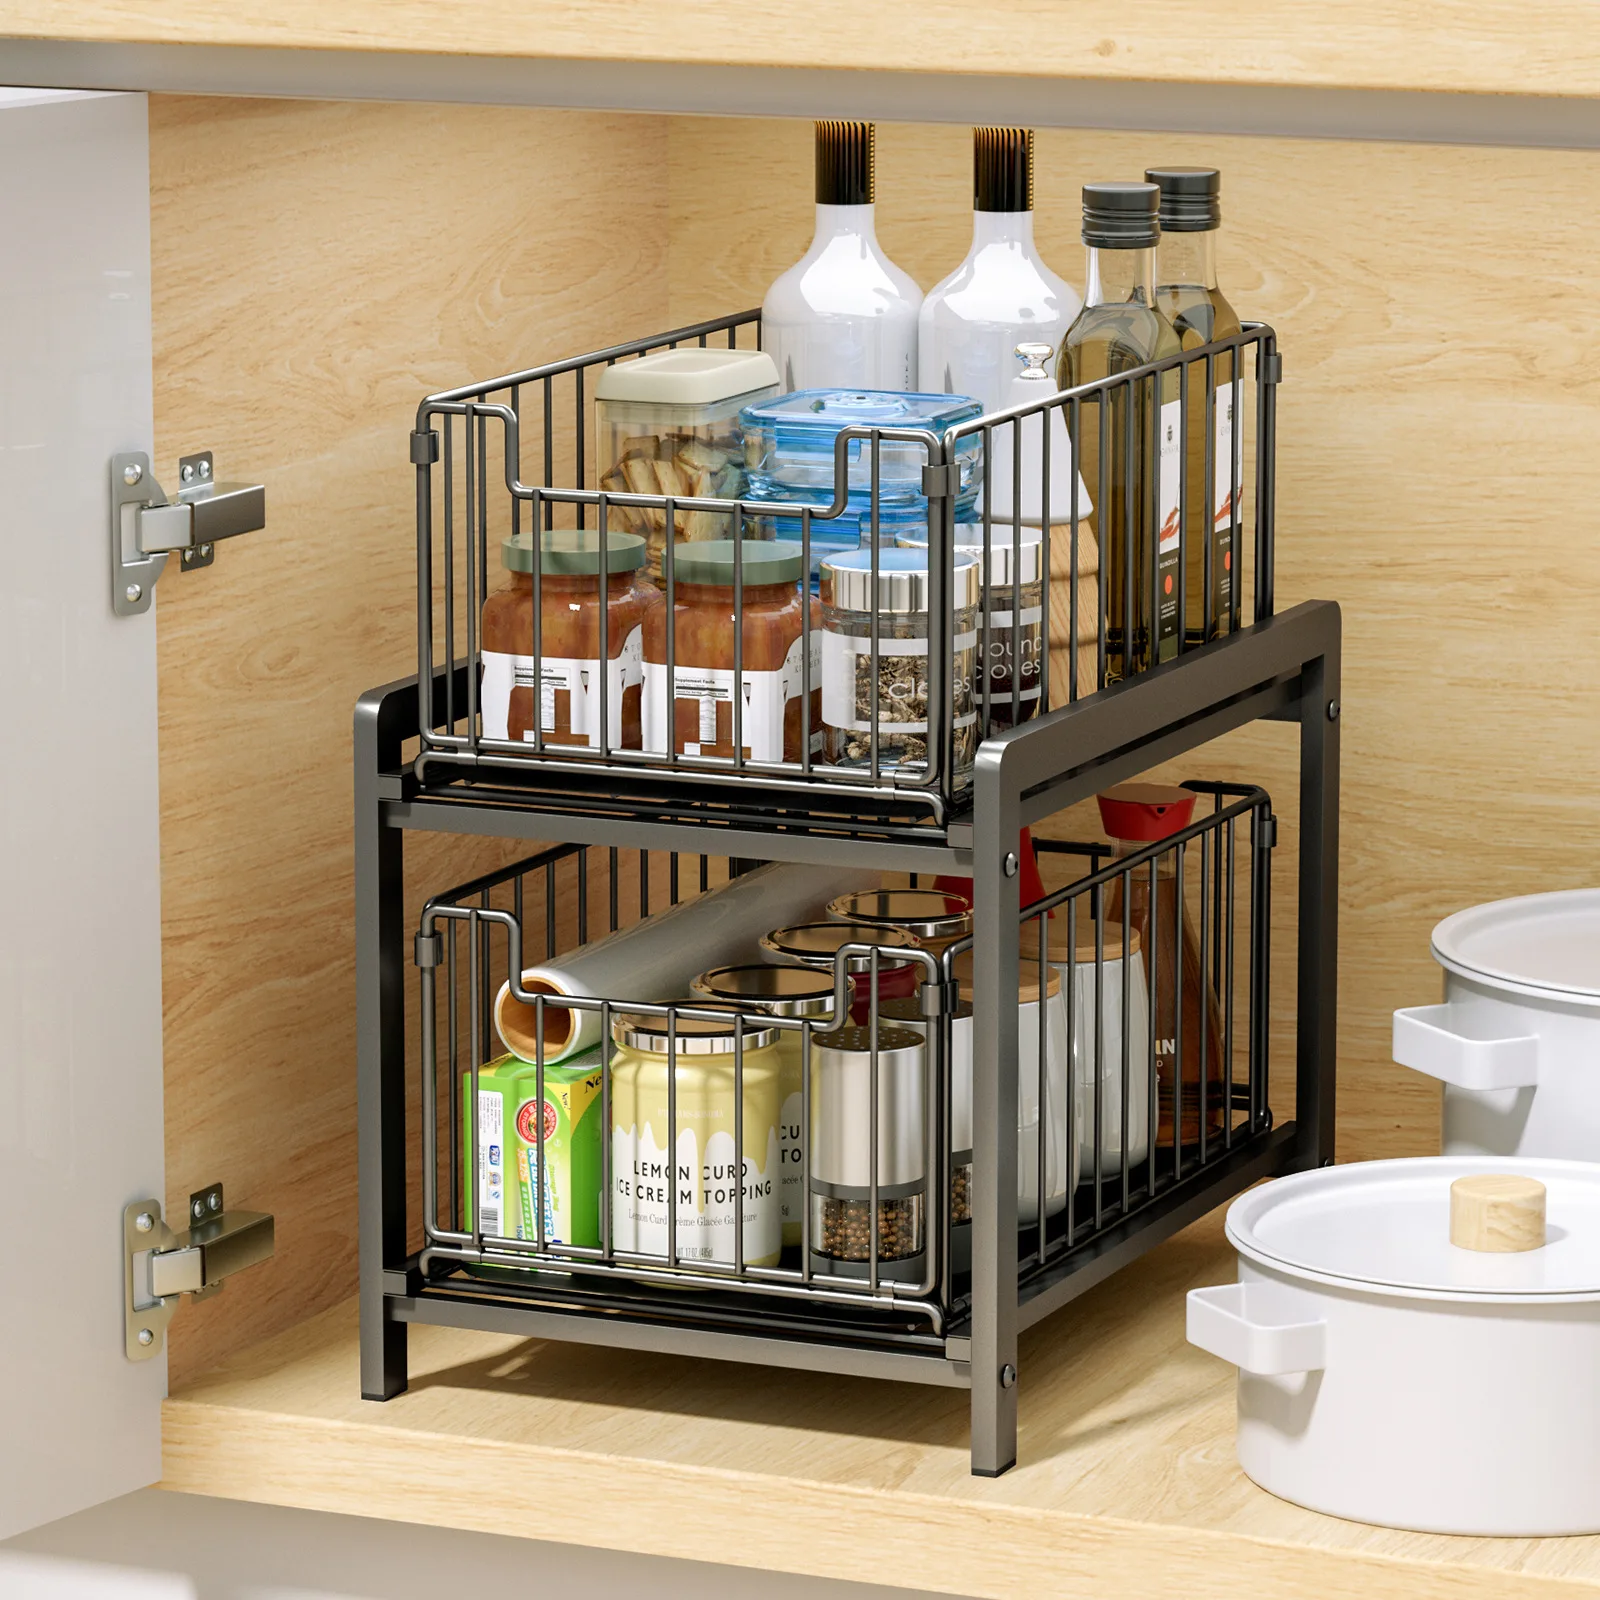 

Kitchen Organizer,Stackable Under Sink Cabinets with Sliding Storage Drawer,Pull Out Cabinets Shelf,Sliding,Countertop Basket